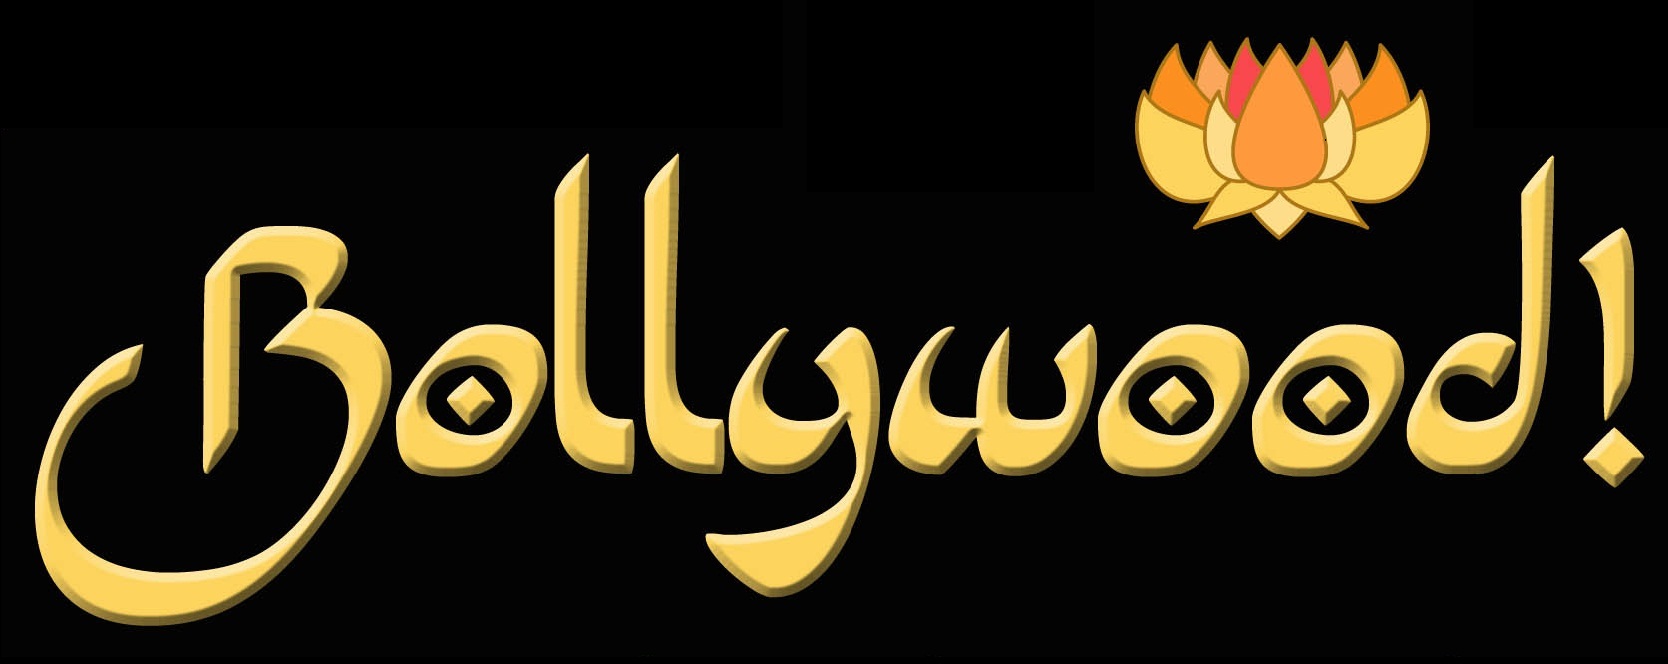 Home Page [Main Page] - Institute Of Hollywood & Bollywood